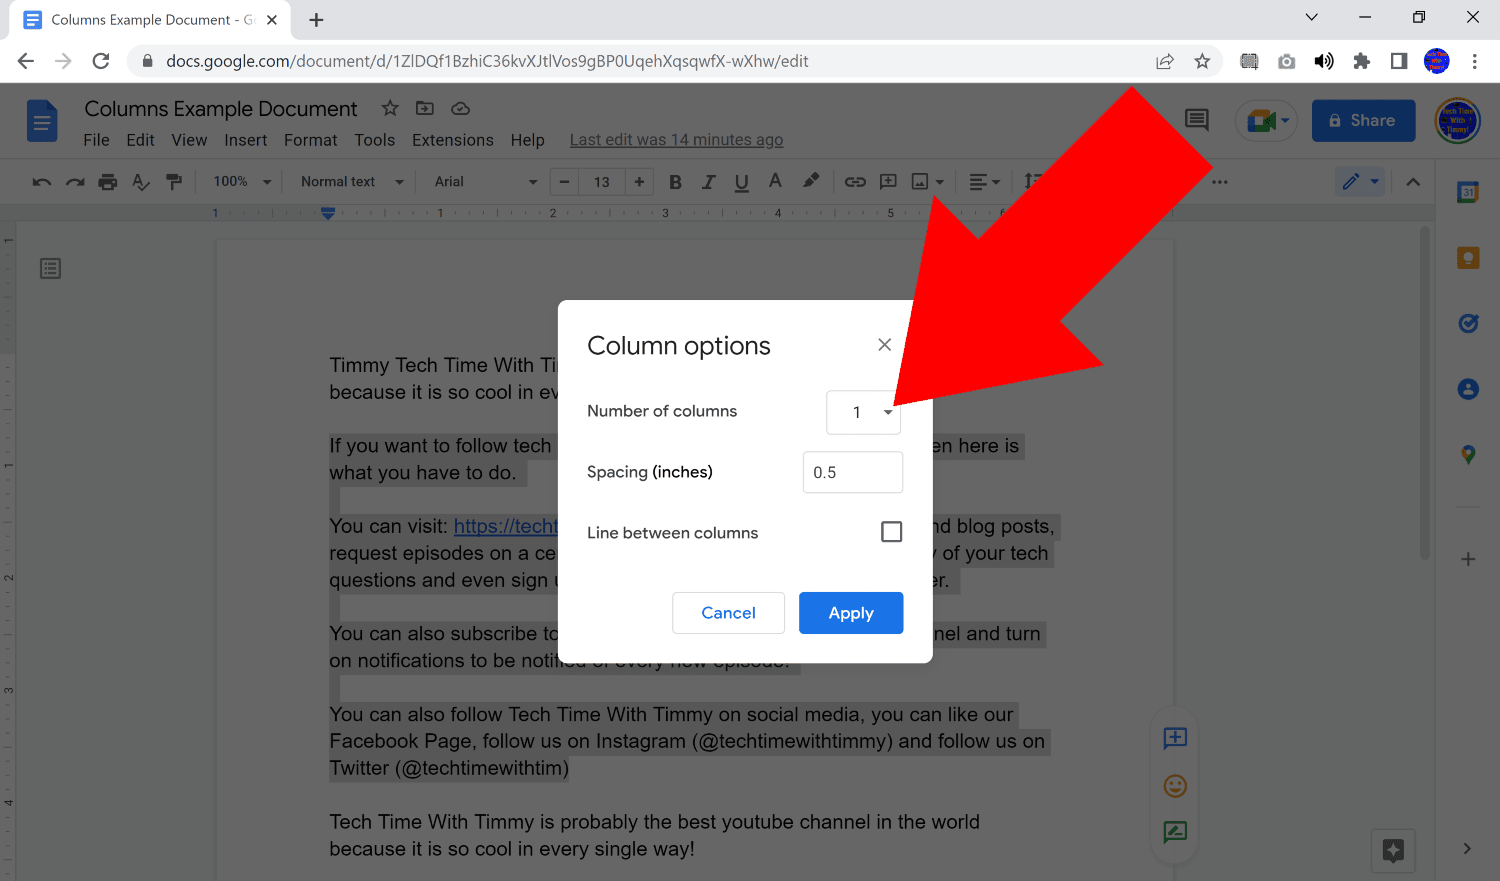 how to add another column in google docs